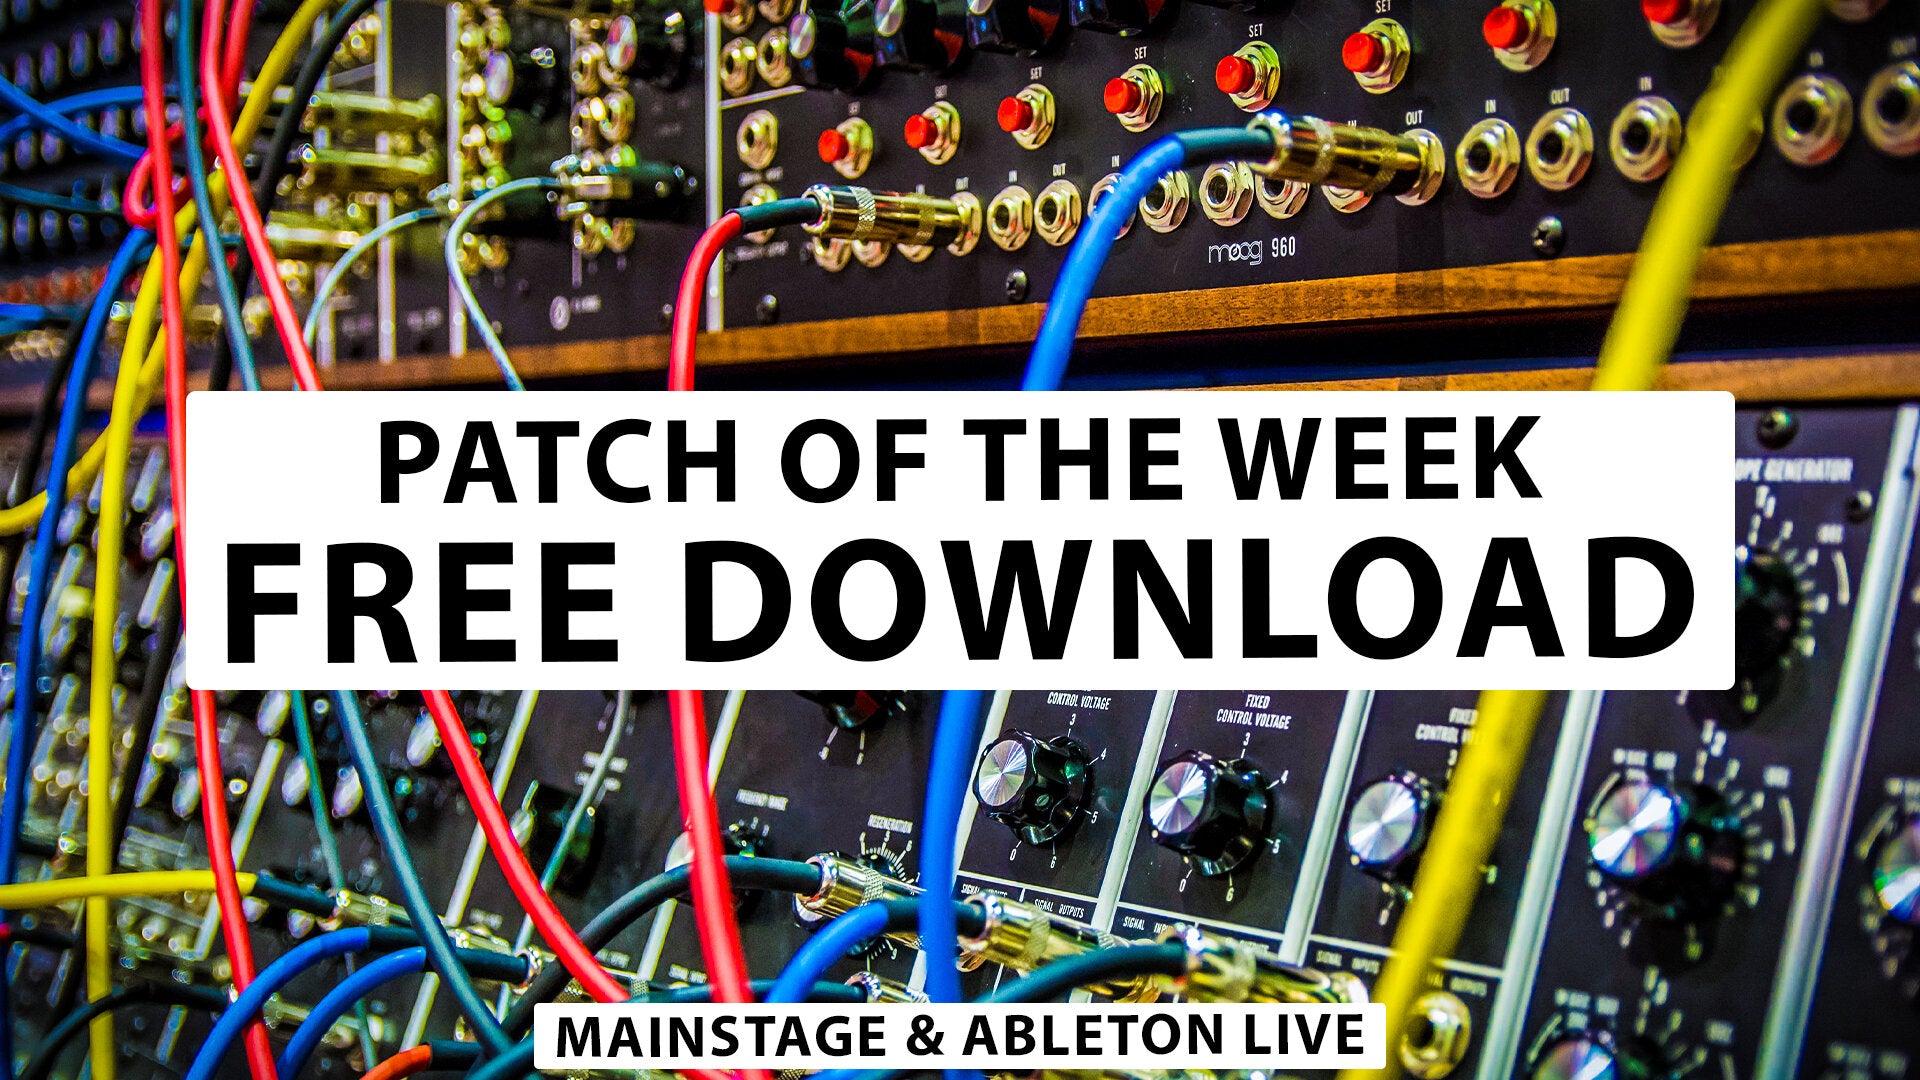 Alpha Pad - Free MainStage & Ableton Worship Patch!